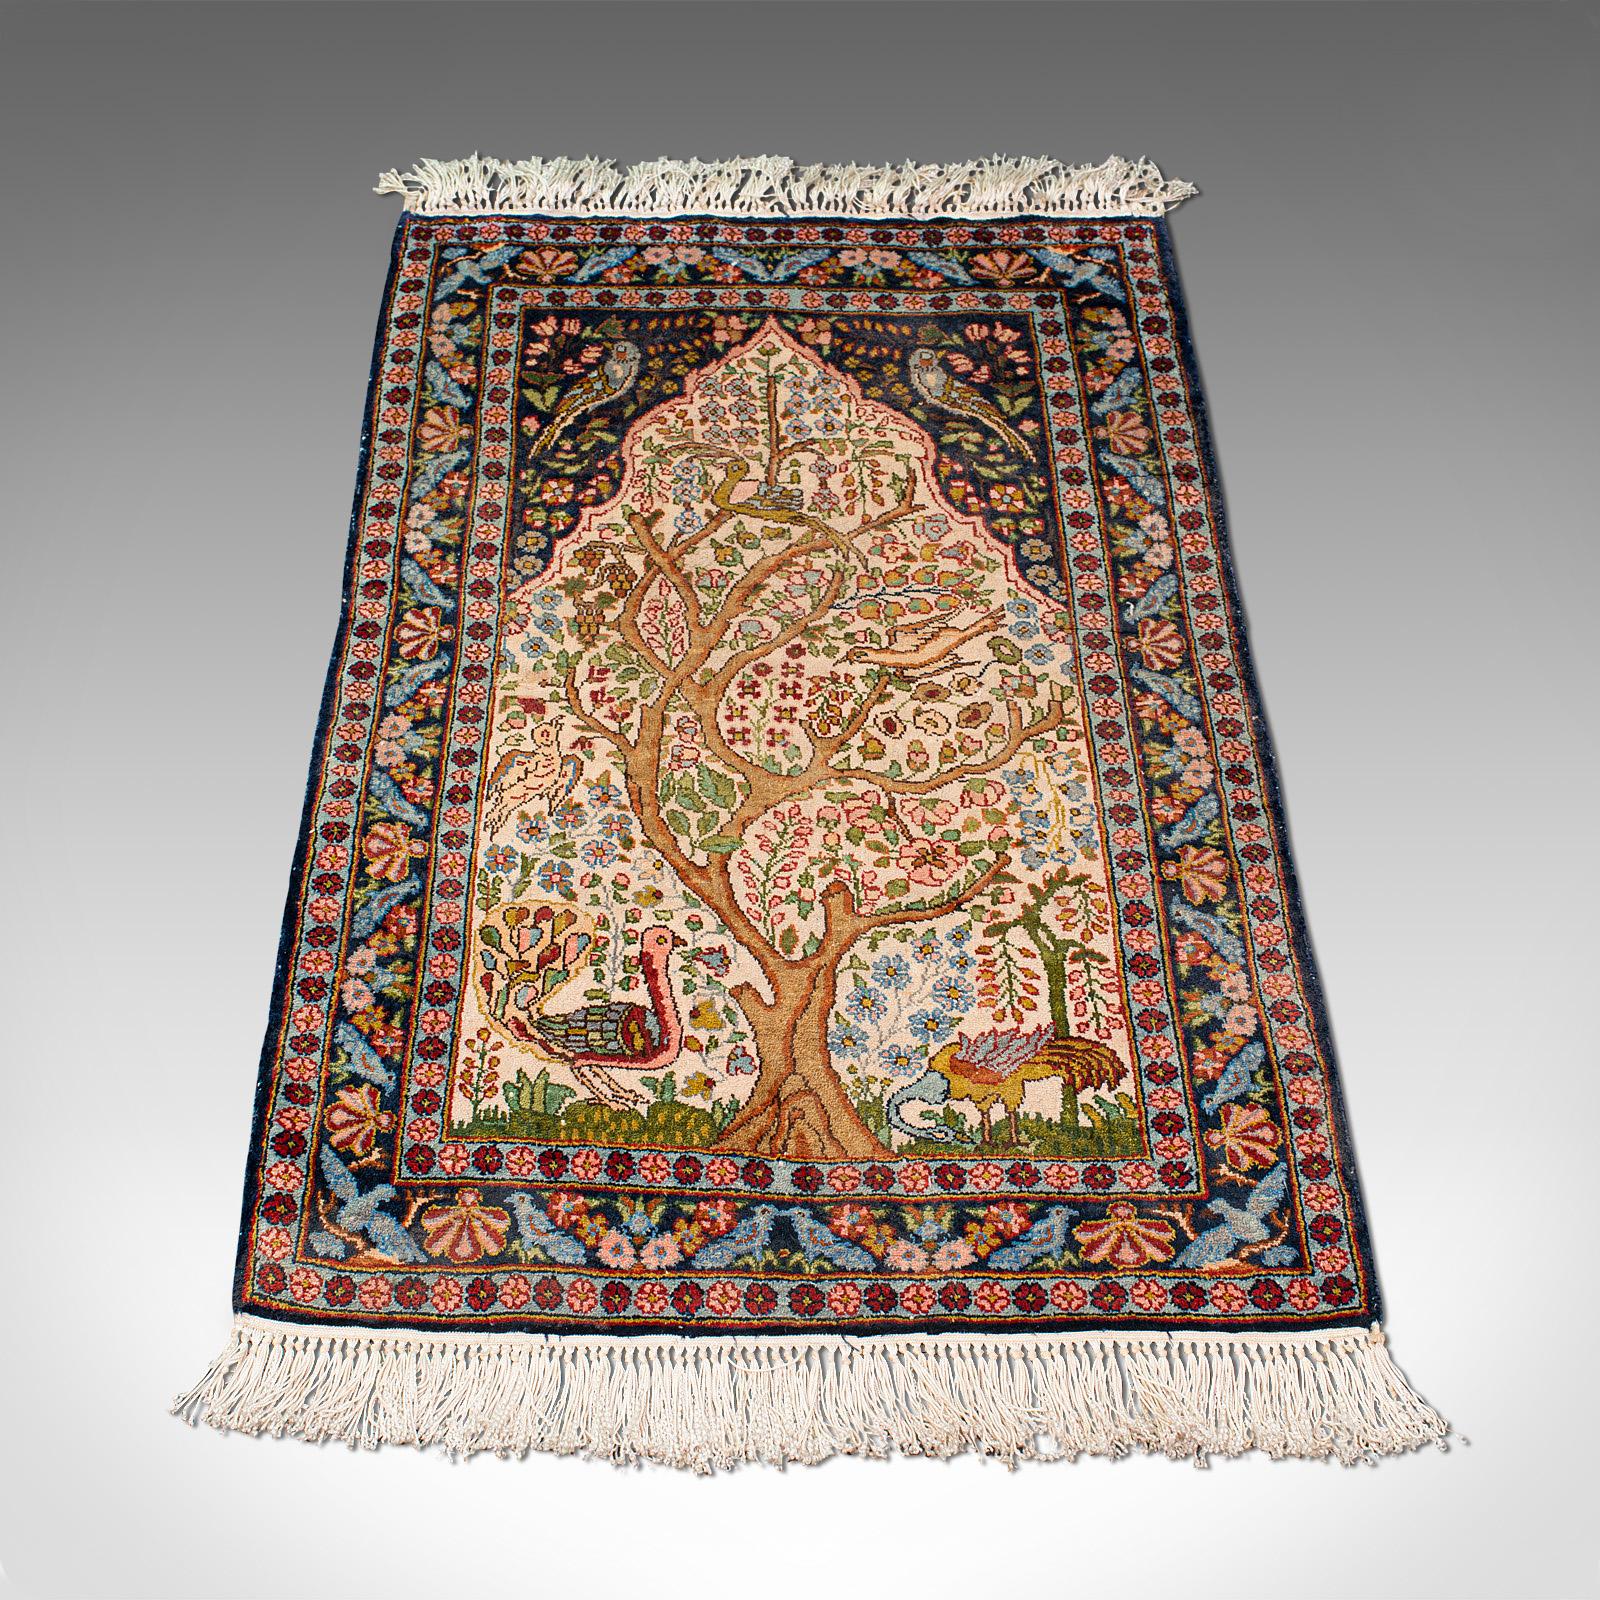 This is a vintage tree of life rug. A Caucasian, woven small carpet or prayer mat, dating to the late Art Deco period, circa 1940.

Of useful doorway size at 55cm x 95cm (21.75